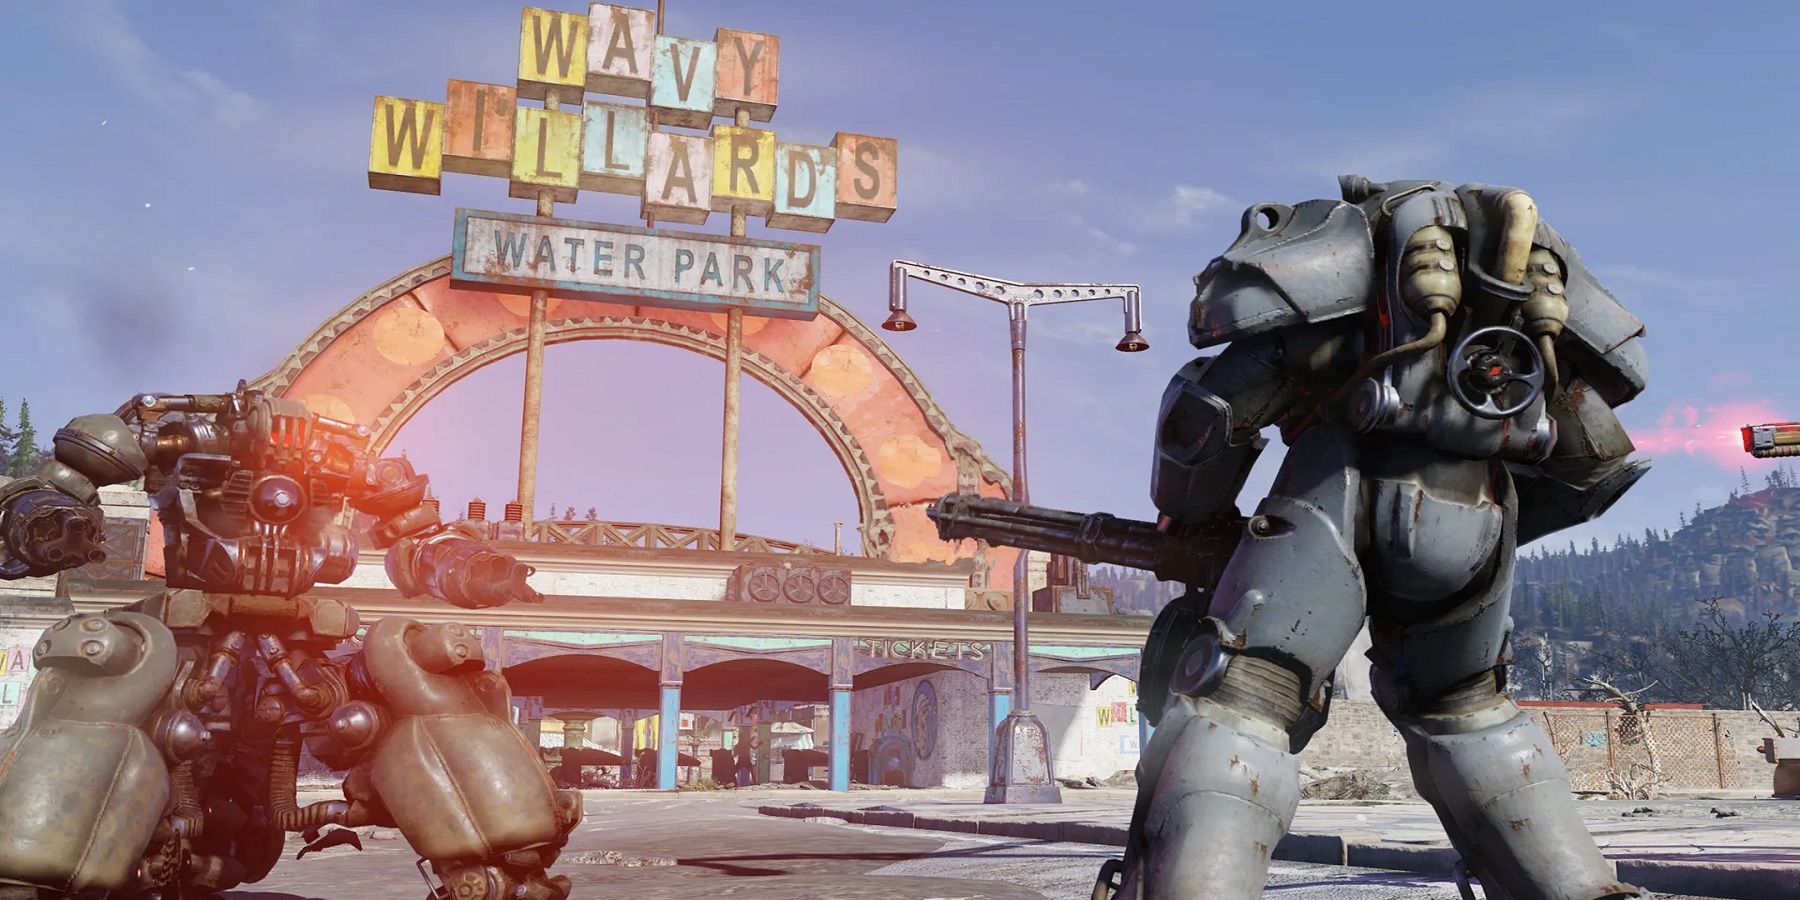 Fallout 76 is set to take players to a brand new location to scratch any player's itch for a New Vegas-style area to explore.